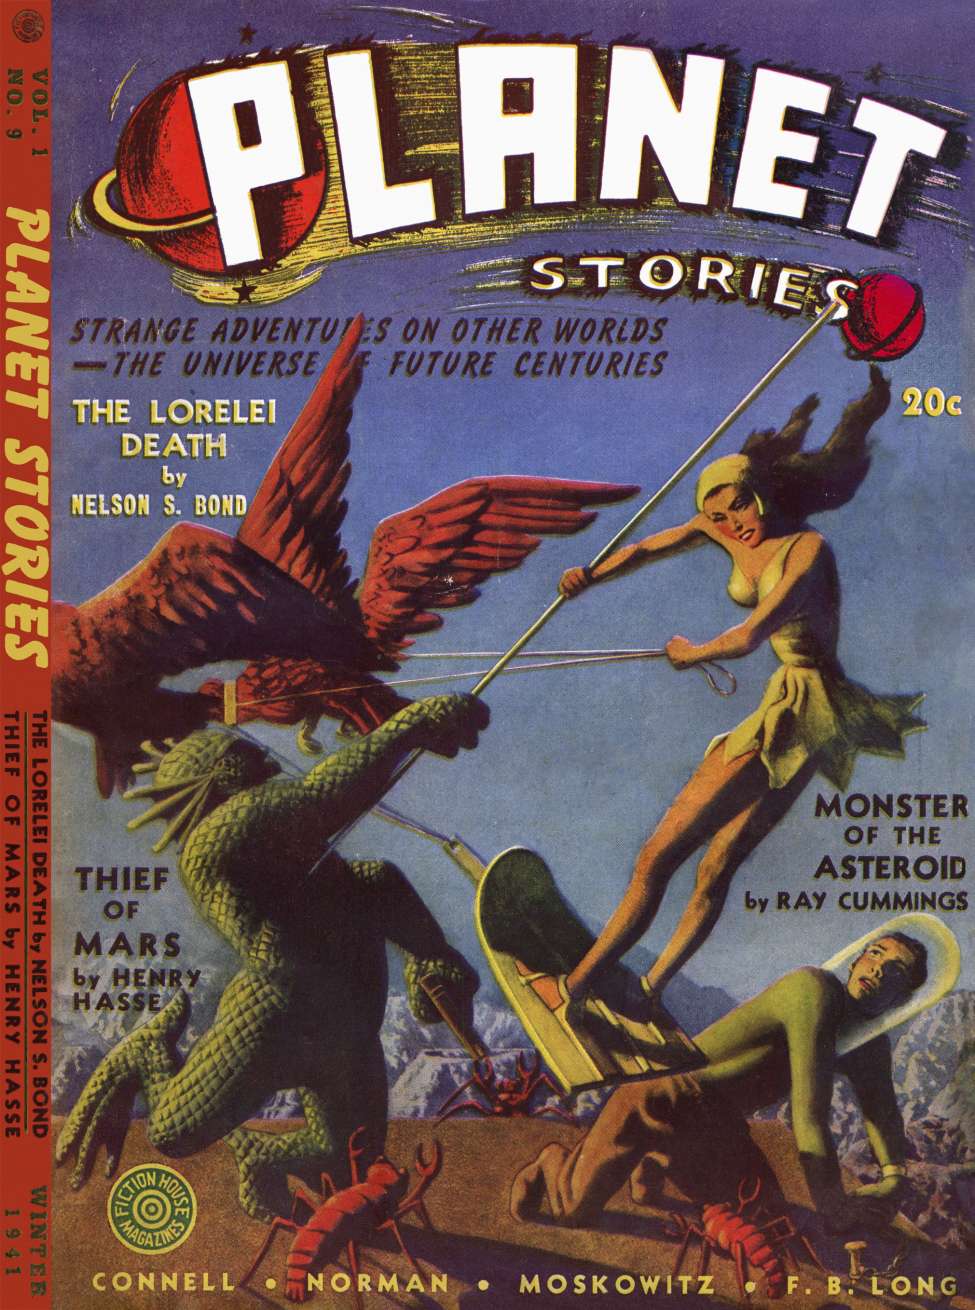 Comic Book Cover For Planet Stories v1 9 - The Lorelei Death - Nelson S. Bond